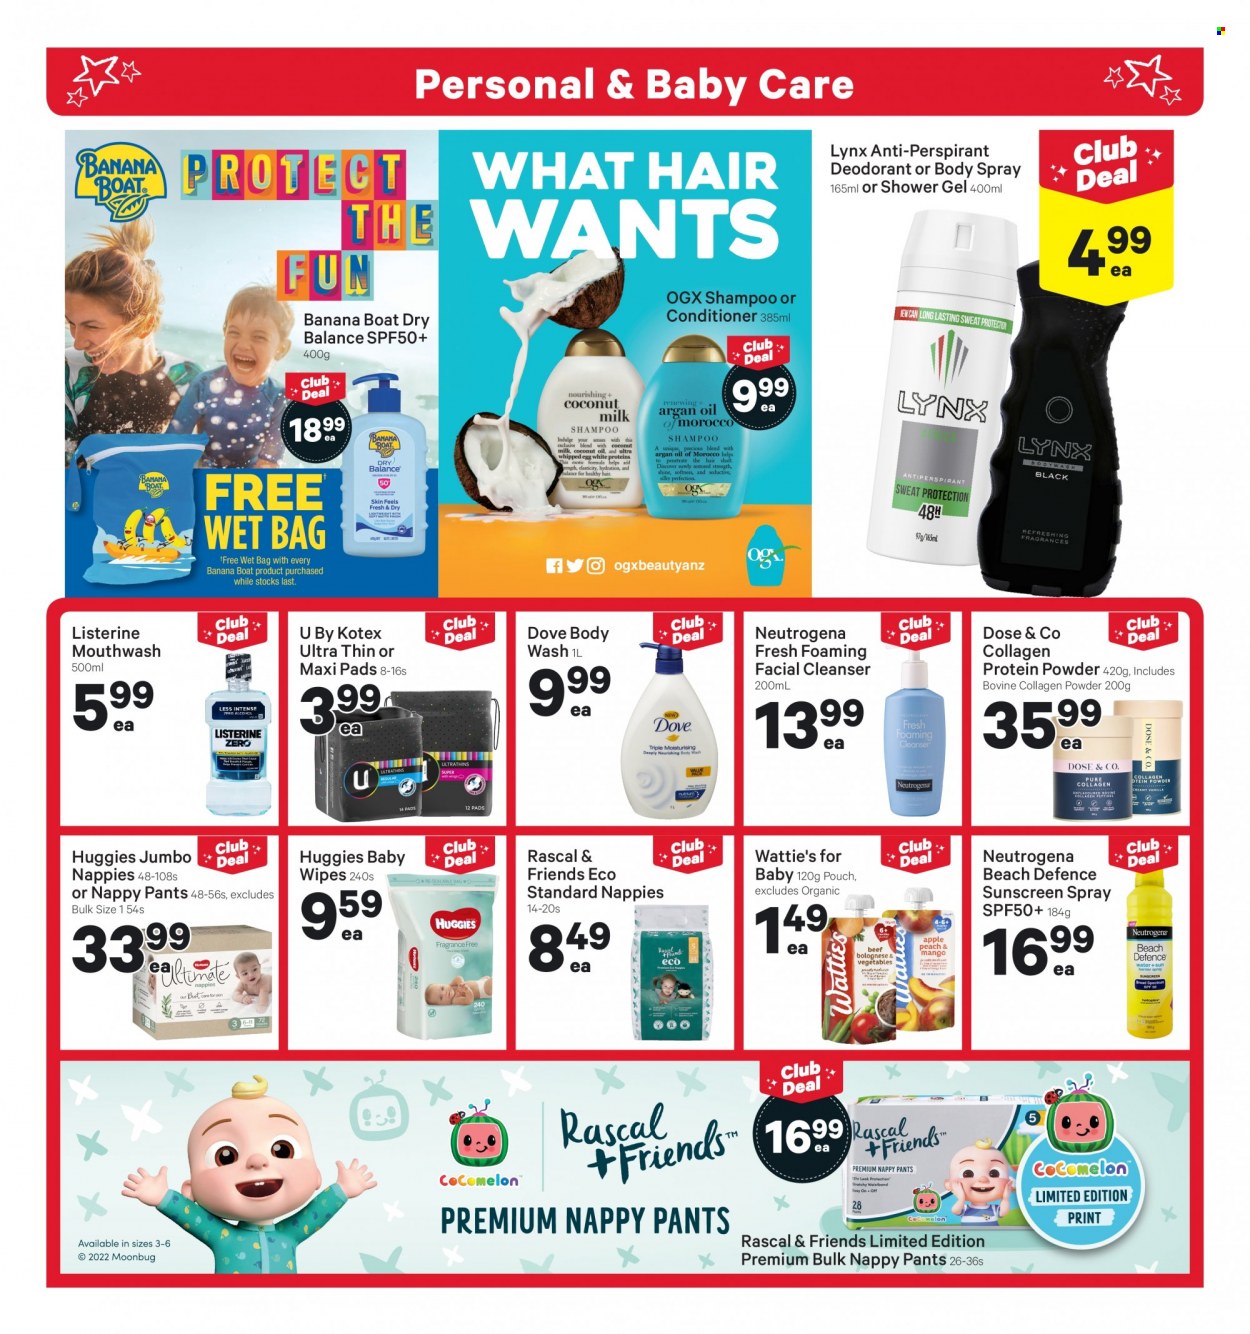 thumbnail - New World mailer - 05.12.2022 - 11.12.2022 - Sales products - Wattie's, Silk, Dove, wipes, Huggies, pants, baby wipes, nappies, body wash, shampoo, shower gel, Listerine, mouthwash, sanitary pads, Kotex, cleanser, Neutrogena, OGX, conditioner, body spray, anti-perspirant, deodorant, Schick, bag, whey protein. Page 25.